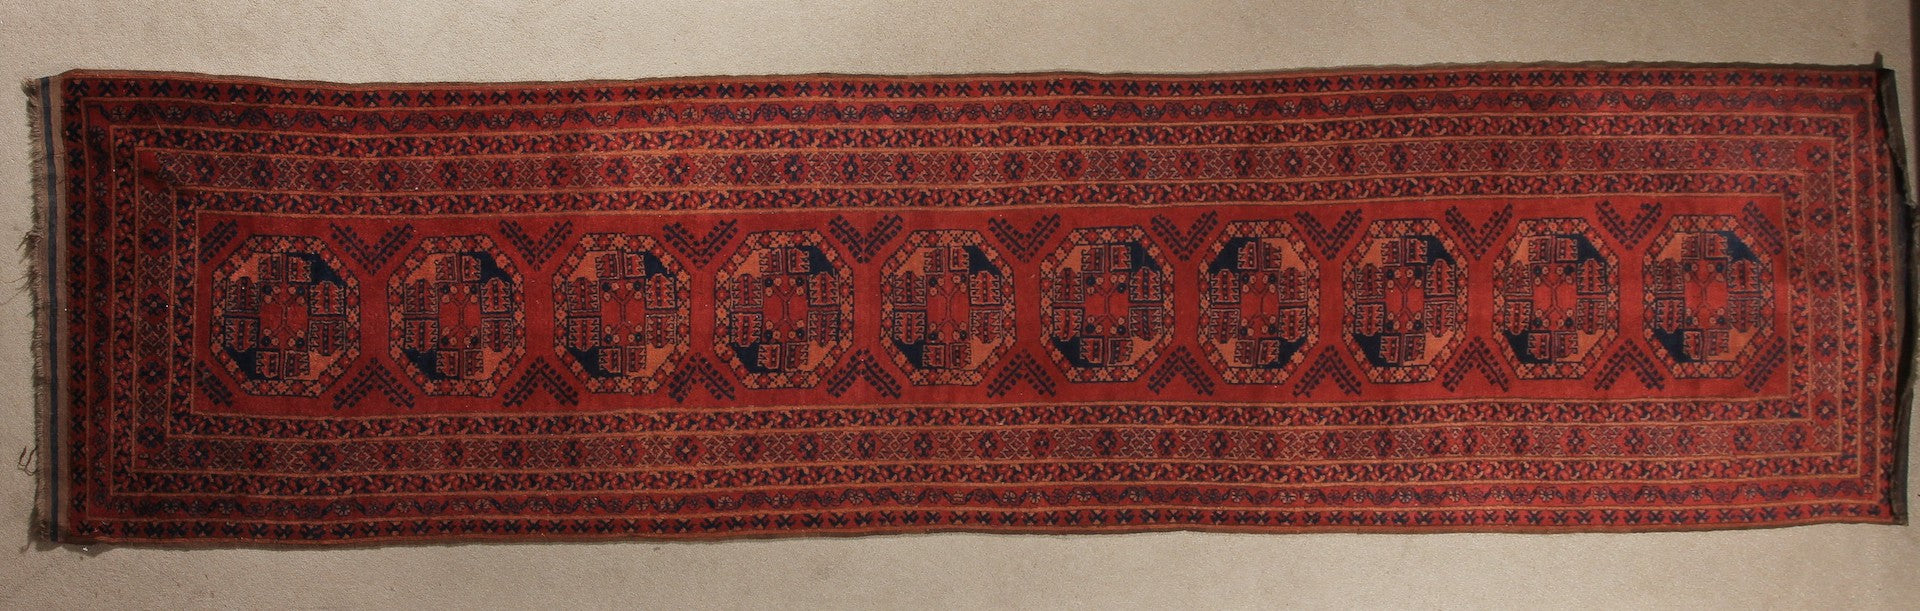 A 2.5 feet by 10 feet turkoman wool rug. The colours used are deep red,rust and black.